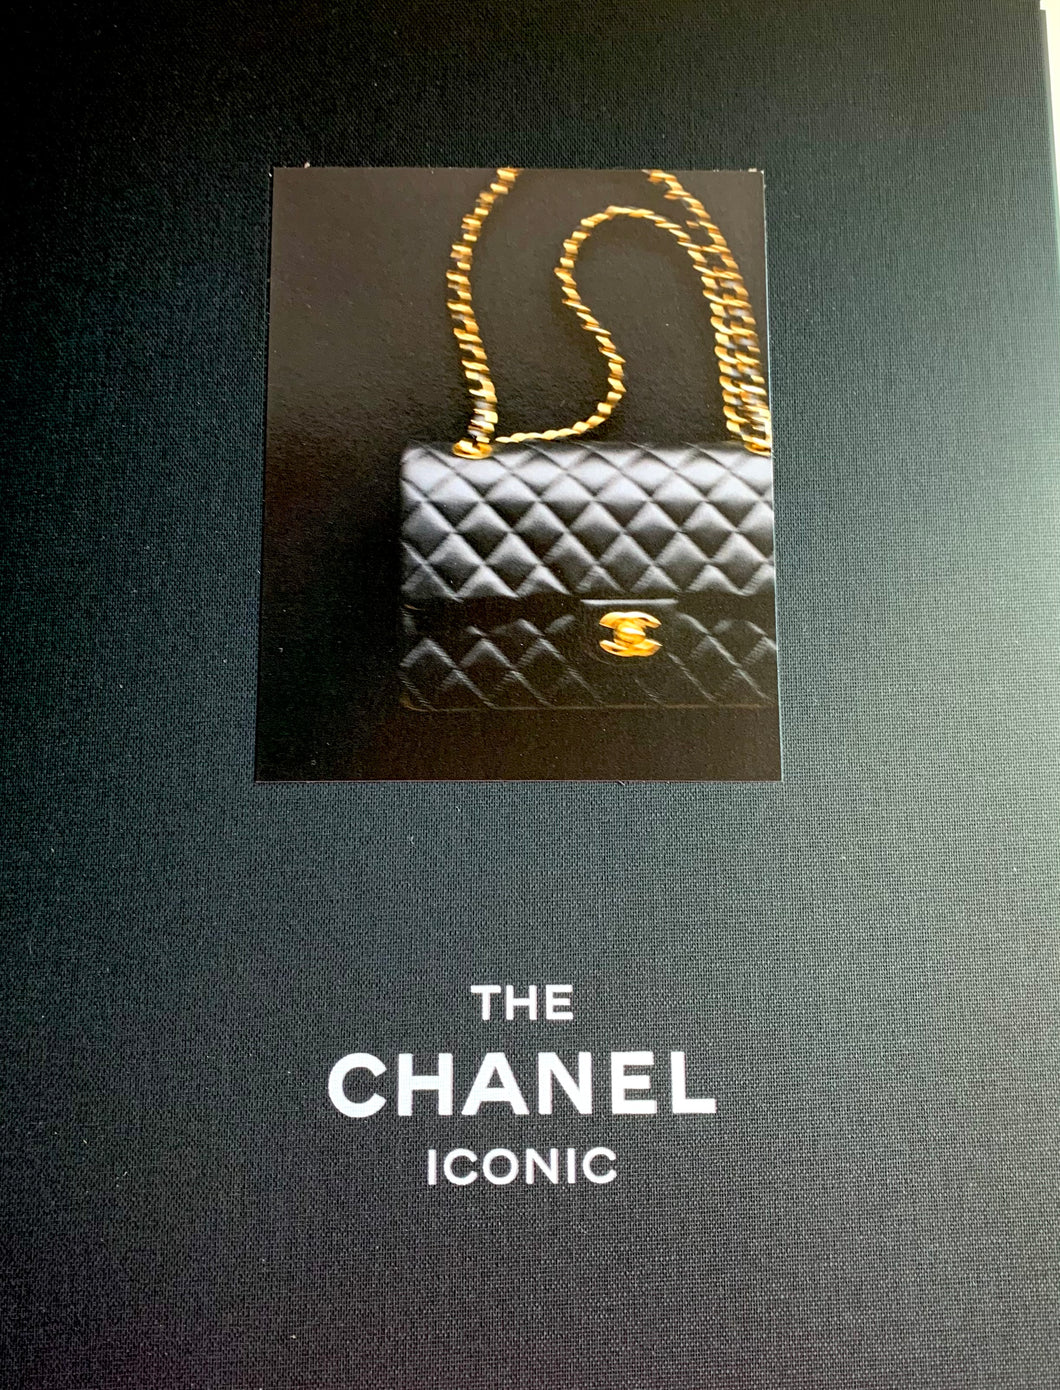 THE CHANEL ICONIC 2021  BOOK CATALOGUE